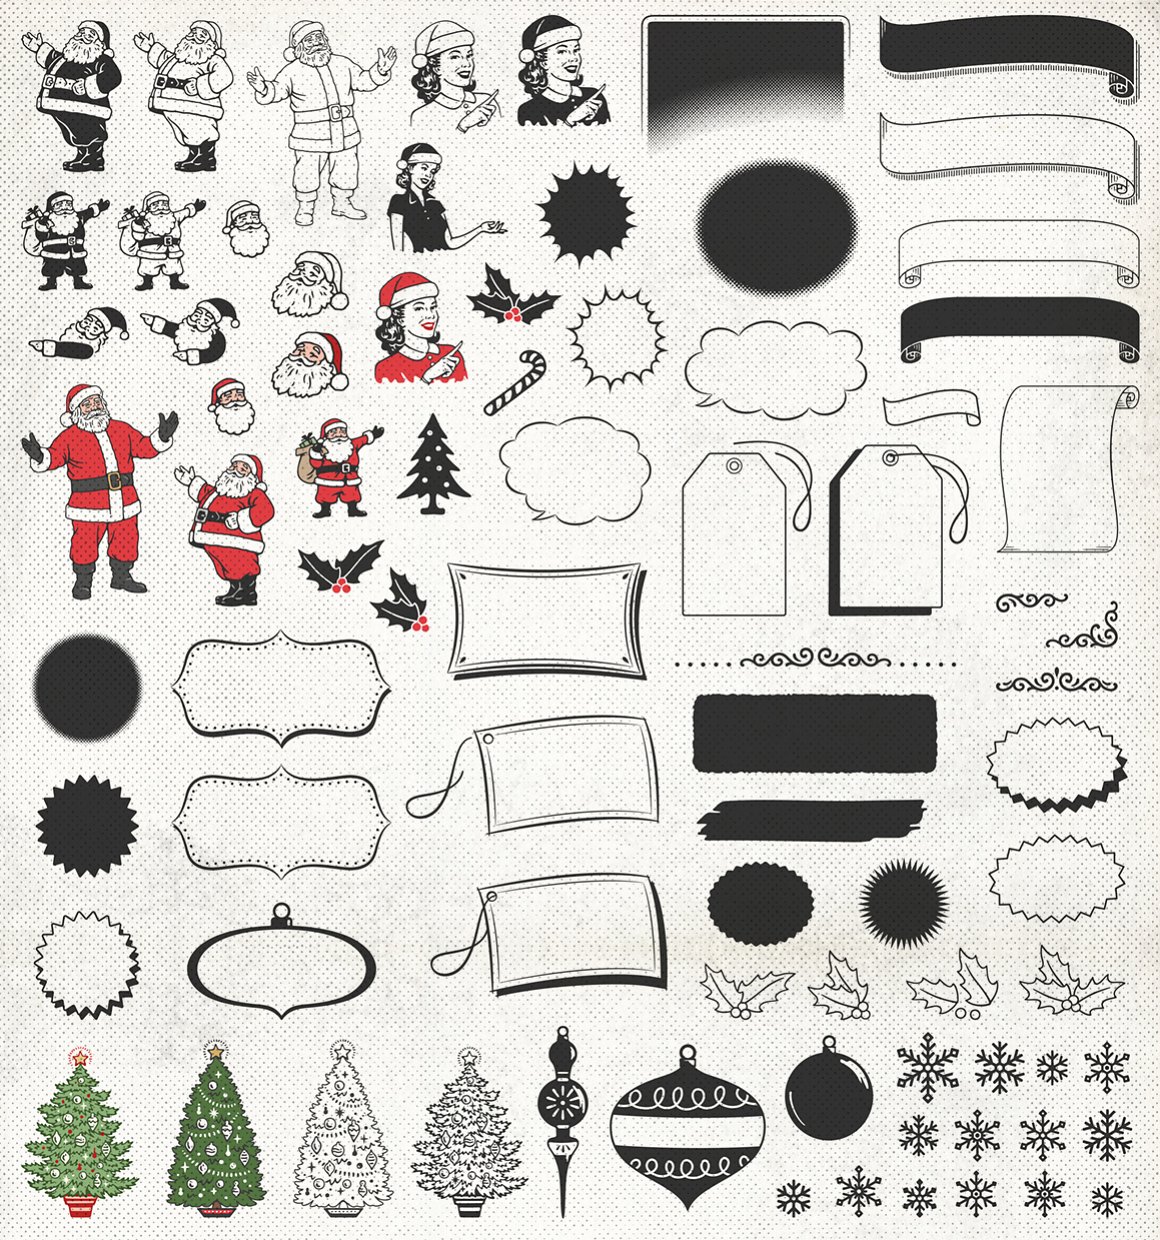 Black illustrations for Christmas composition.